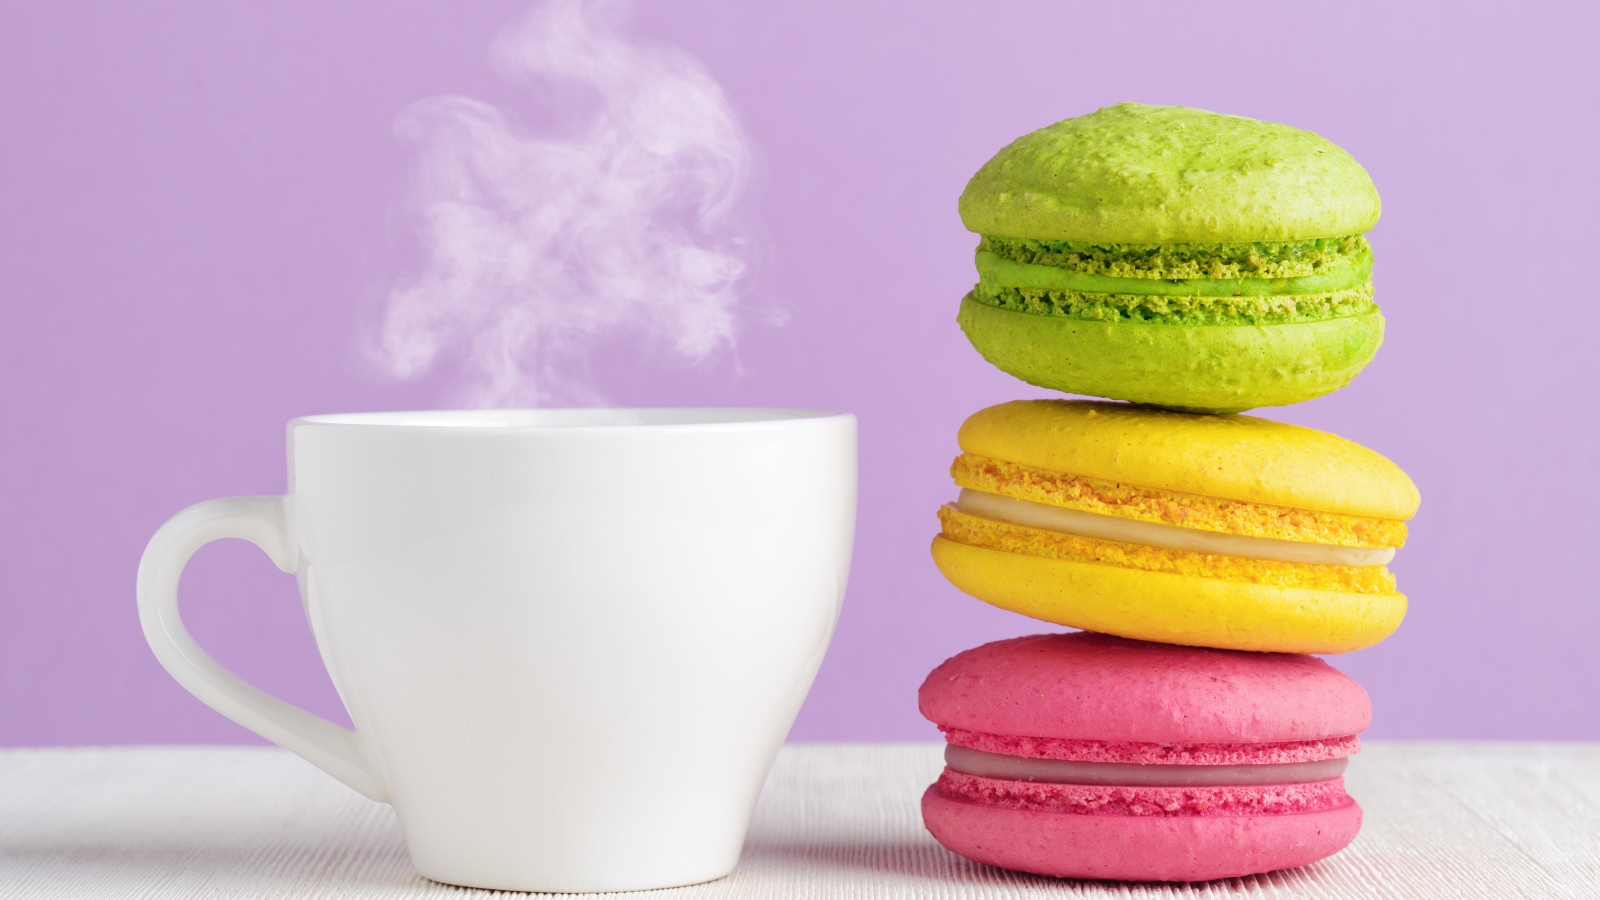 A colorful dessert macaroon with a cup of hot coffee on the table